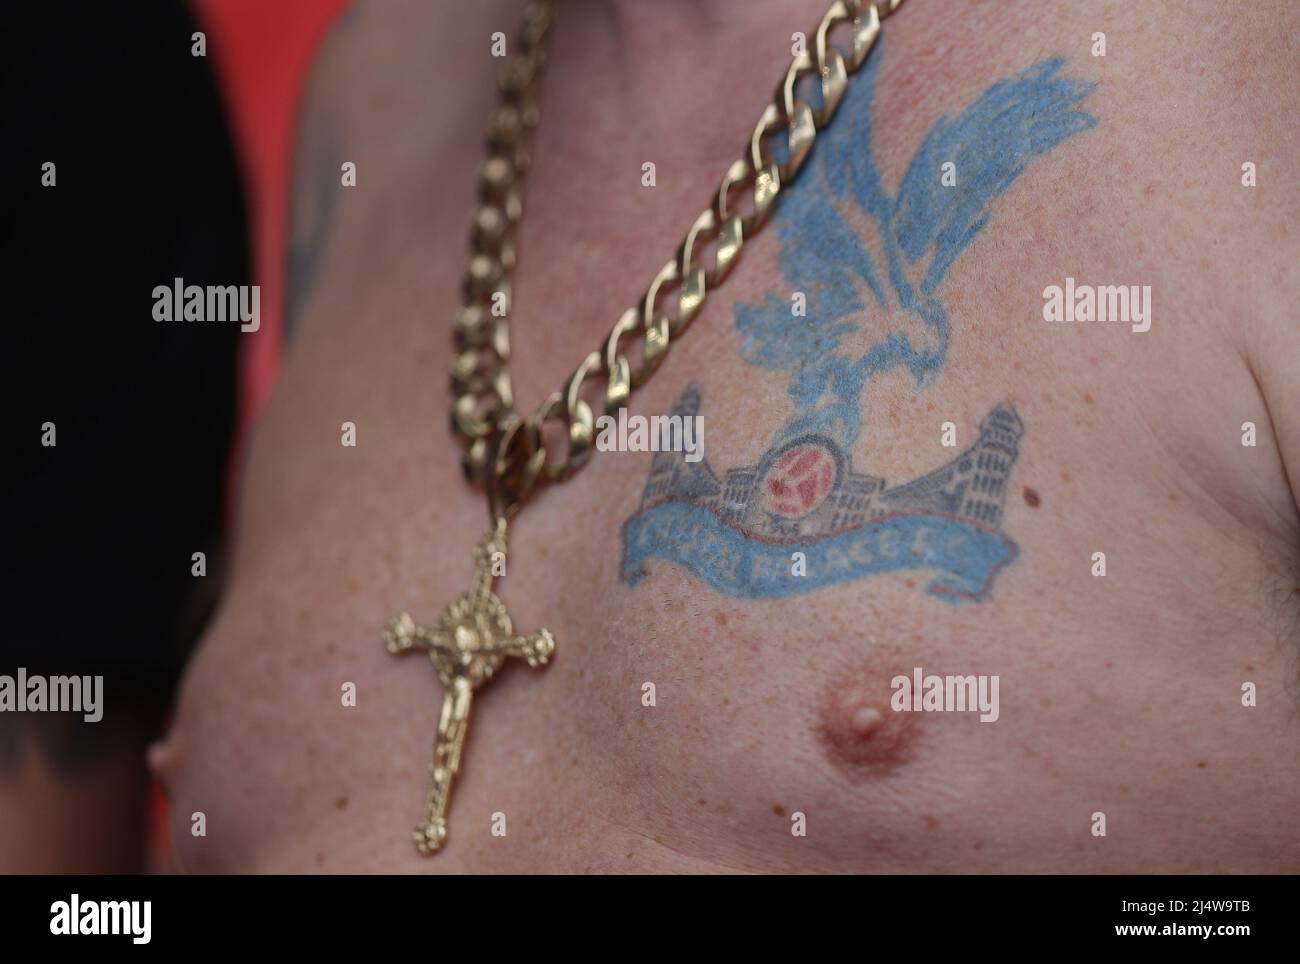 London, UK. 17th Apr, 2022. A Crystal Place fan wears a tattoo of the club crest on his chest during the Emirates FA Cup match at Wembley Stadium, London. Picture credit should read: Paul Terry/Sportimage Credit: Sportimage/Alamy Live News Stock Photo